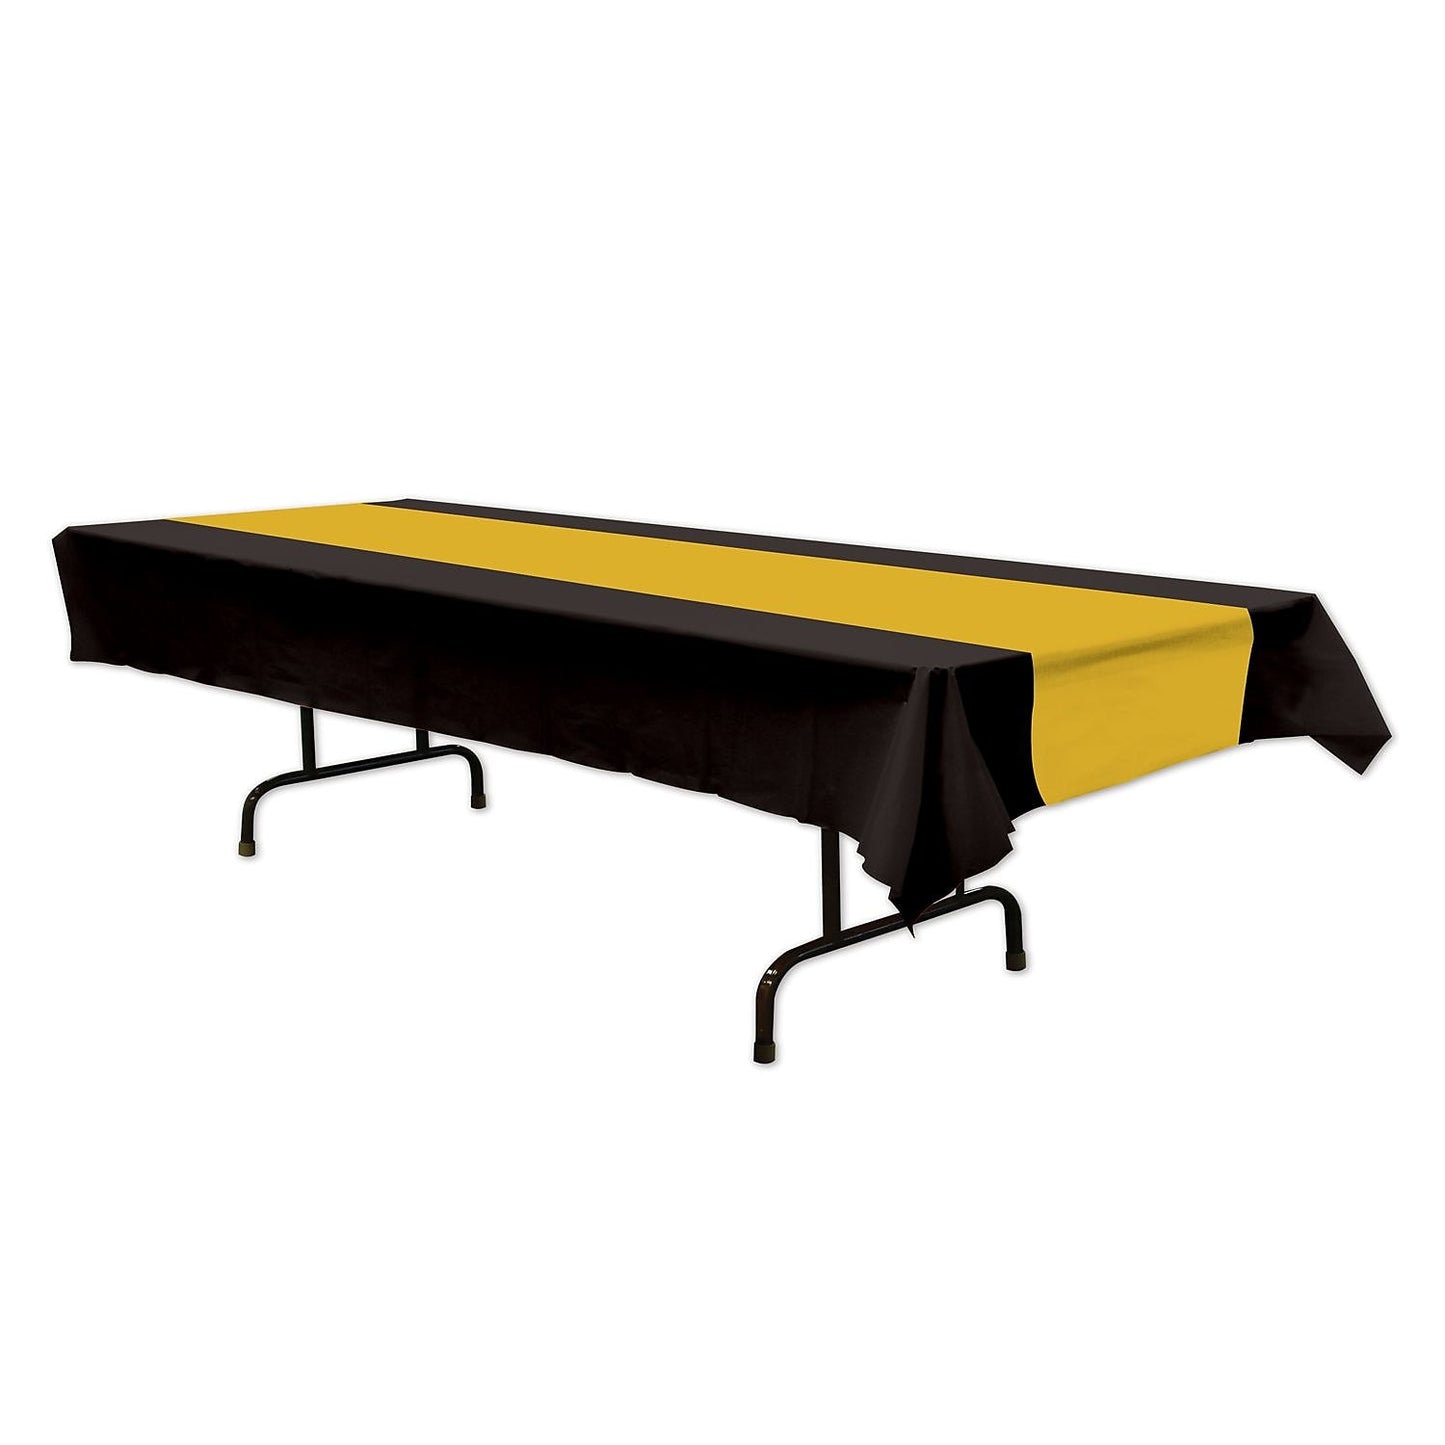 Black and Gold table cover